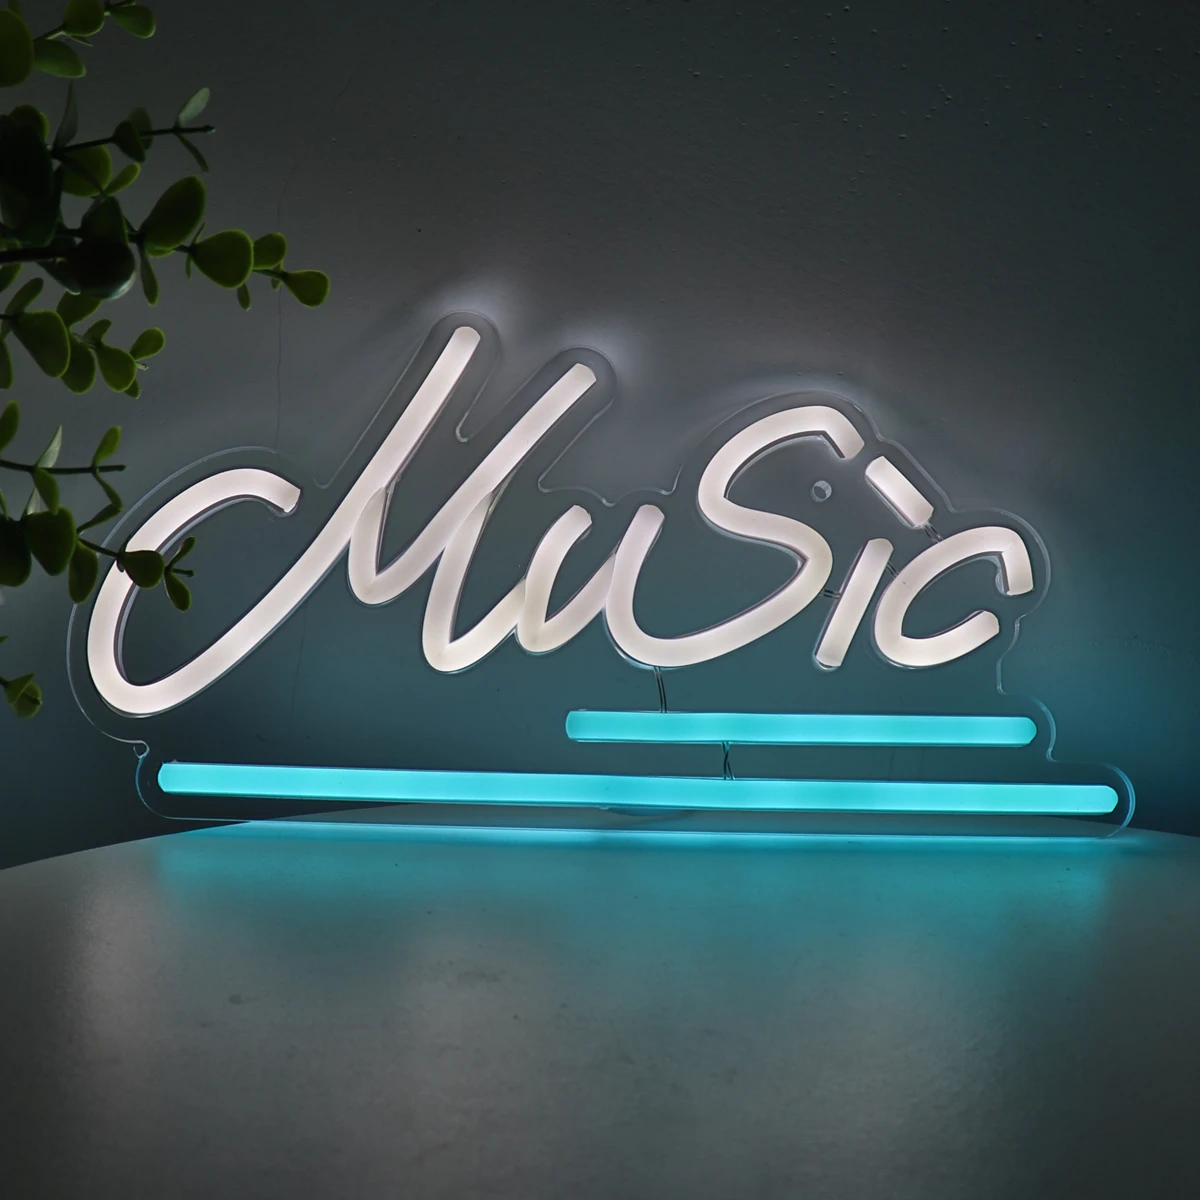 1PC Creative Music Led Wall Neon Sign Light For Room Party Pub Club Music Show Studio New Year Decoration 11.22''*5.47''